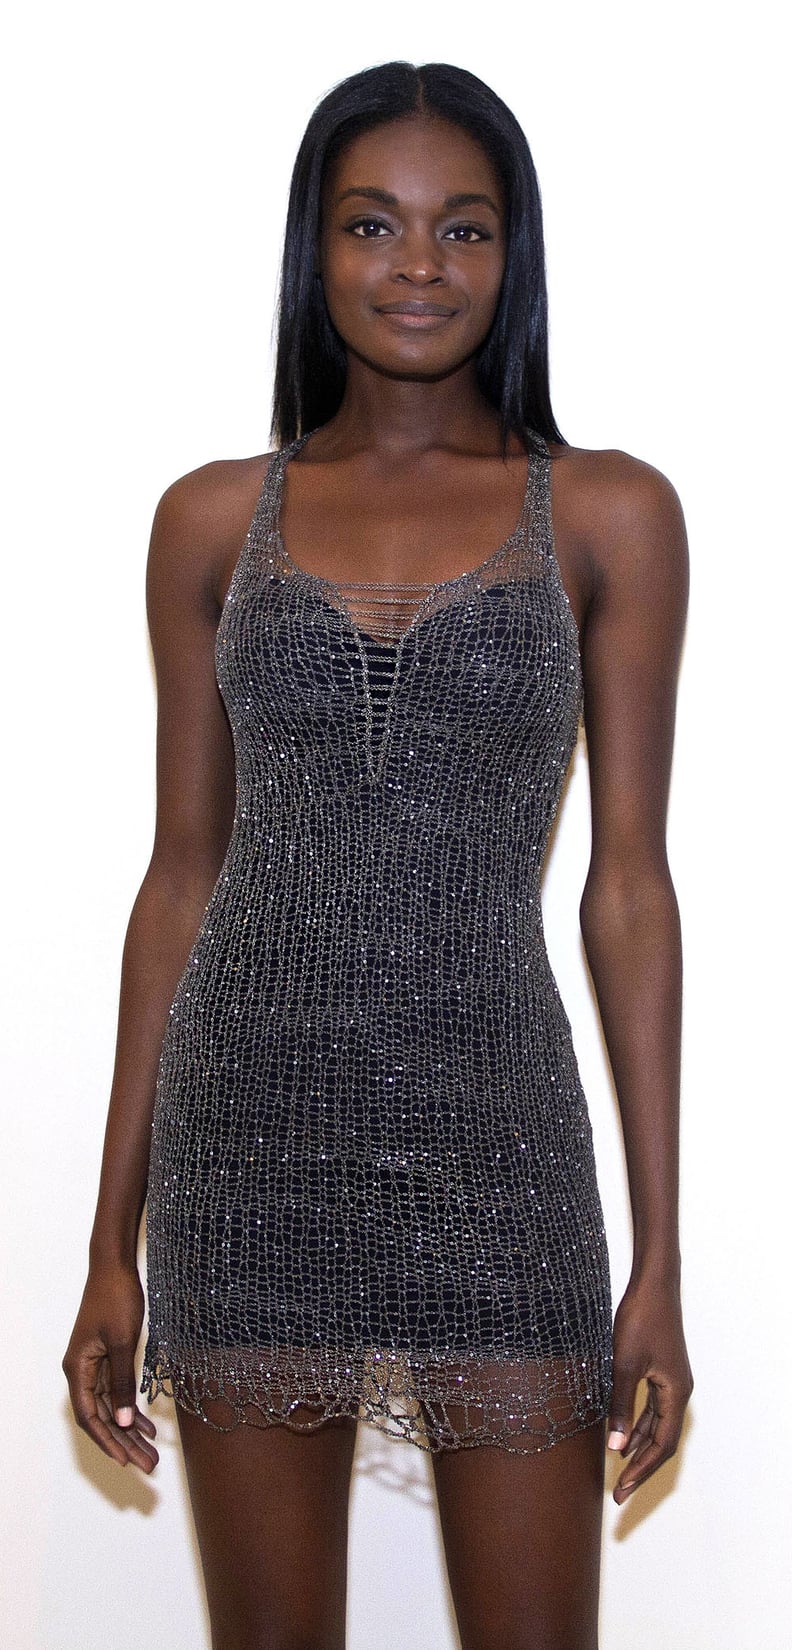 A Similar Metal Minidress From Natalia Fedner Haute Couture